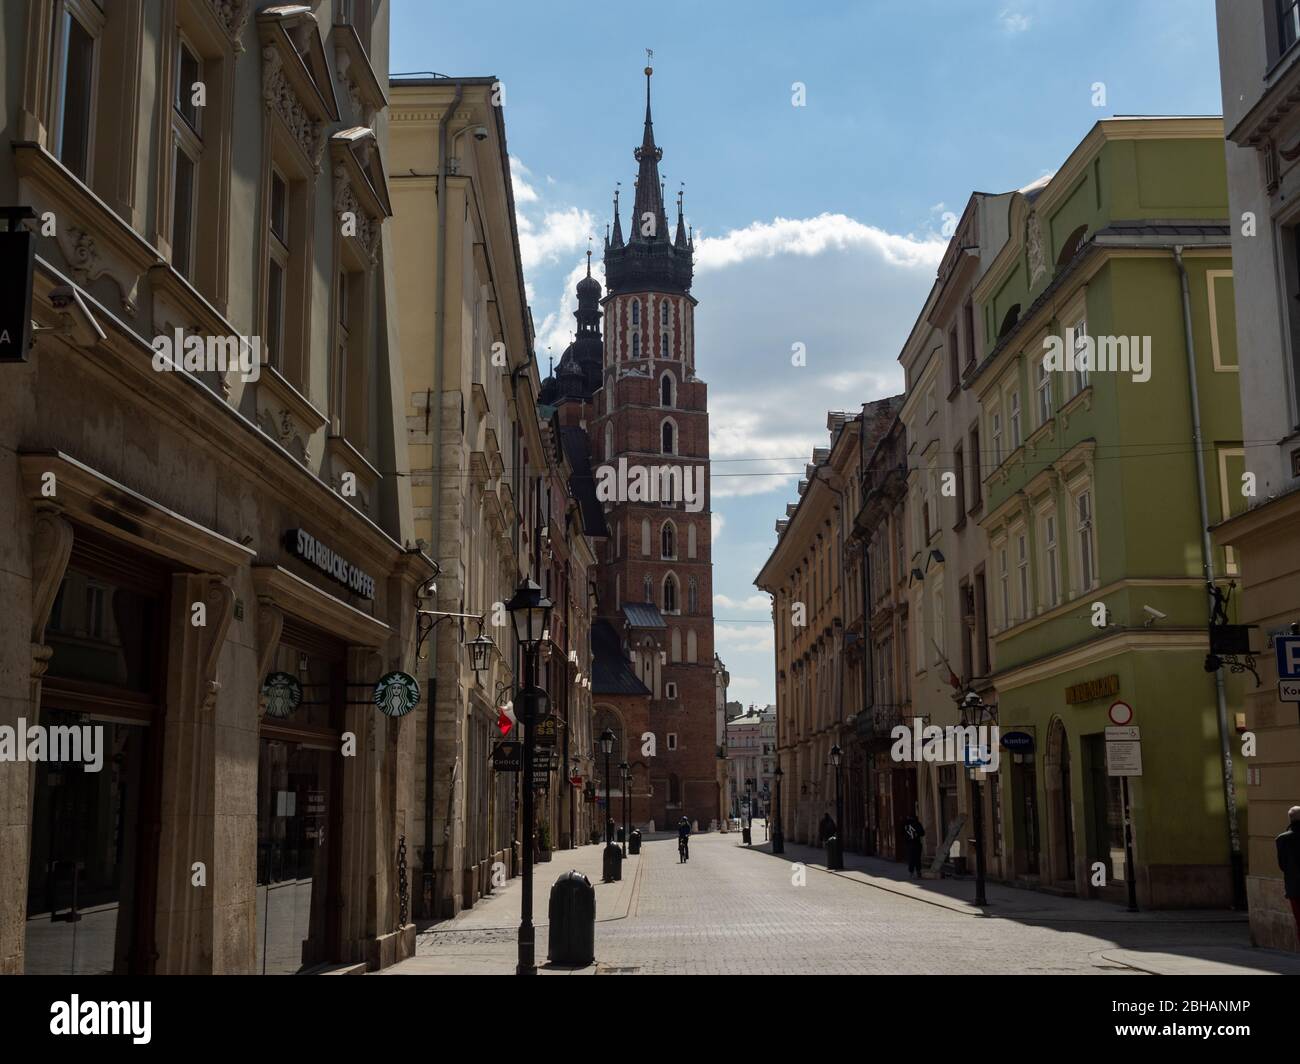 Cracow/Poland - 22/04/2020. Almost empty Florianska street in Krakow during coronavirus covid-19 pandemic.  At the end of the street towers of Mariack Stock Photo